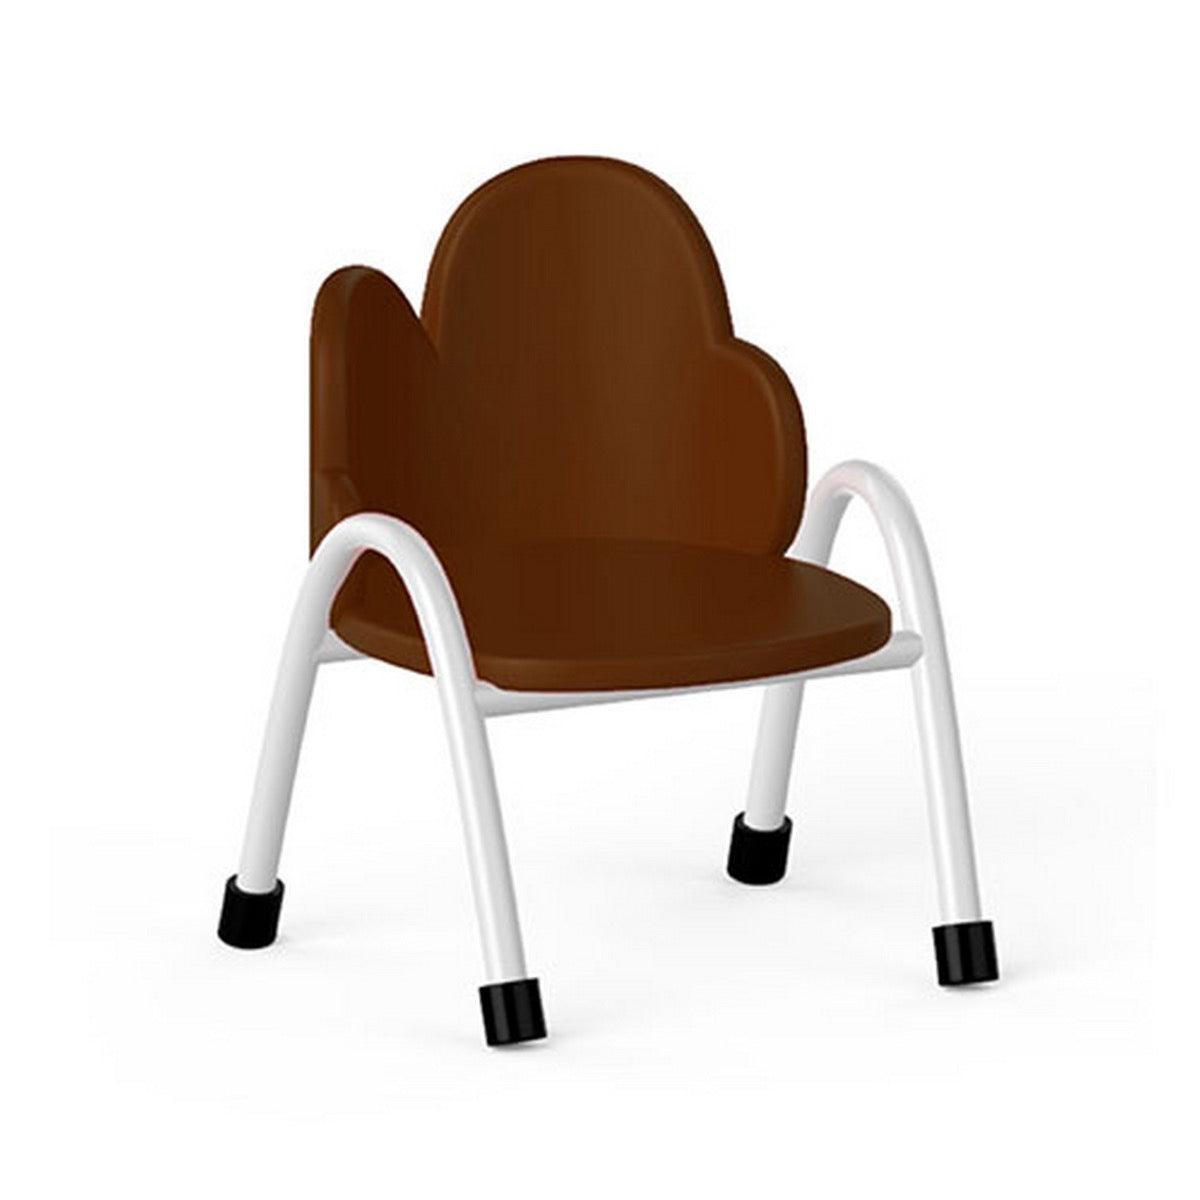 Ok Play Cloud Chair, Study Chair, Sturdy And Durable Chair, Plastic Chair, Perfect For Home, Creches And School, Brown, 2 to 4 Years, Height 8 Inches